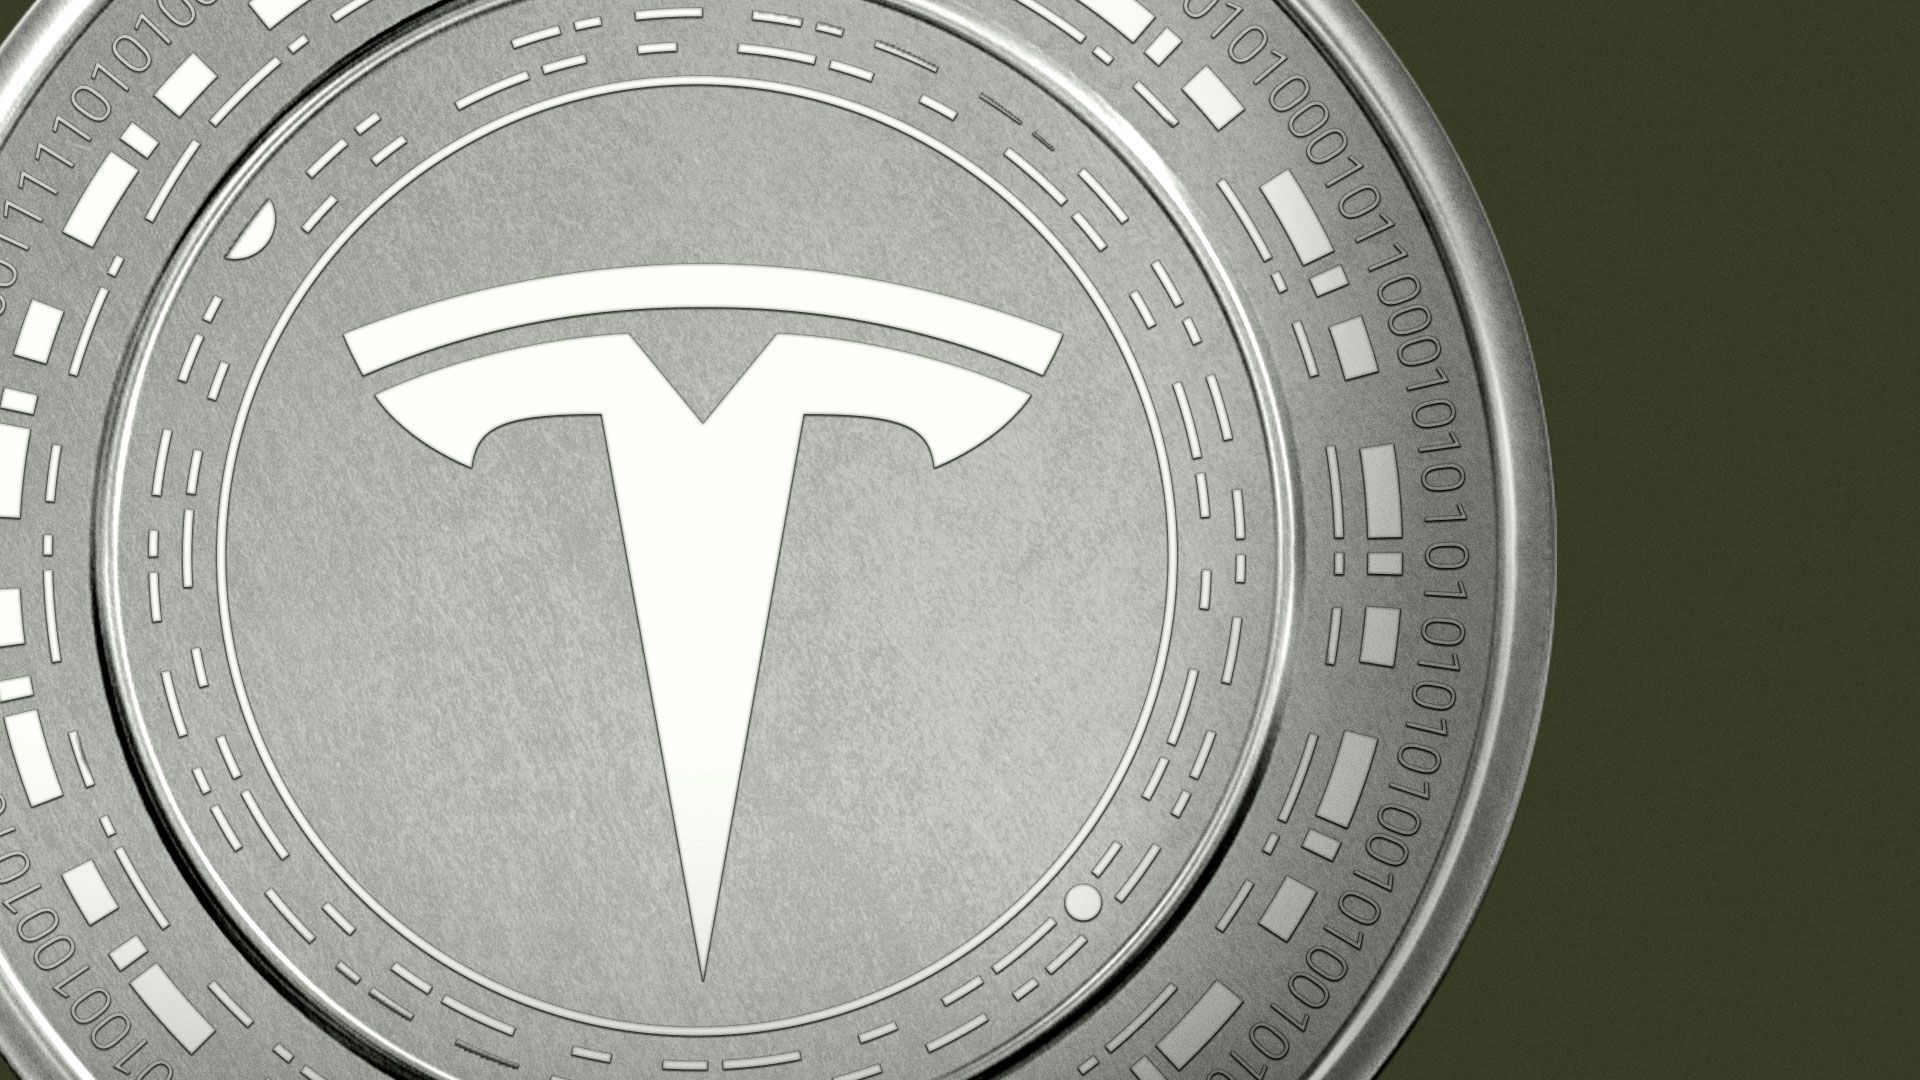 Illustration of Bitcoin with the Tesla logo